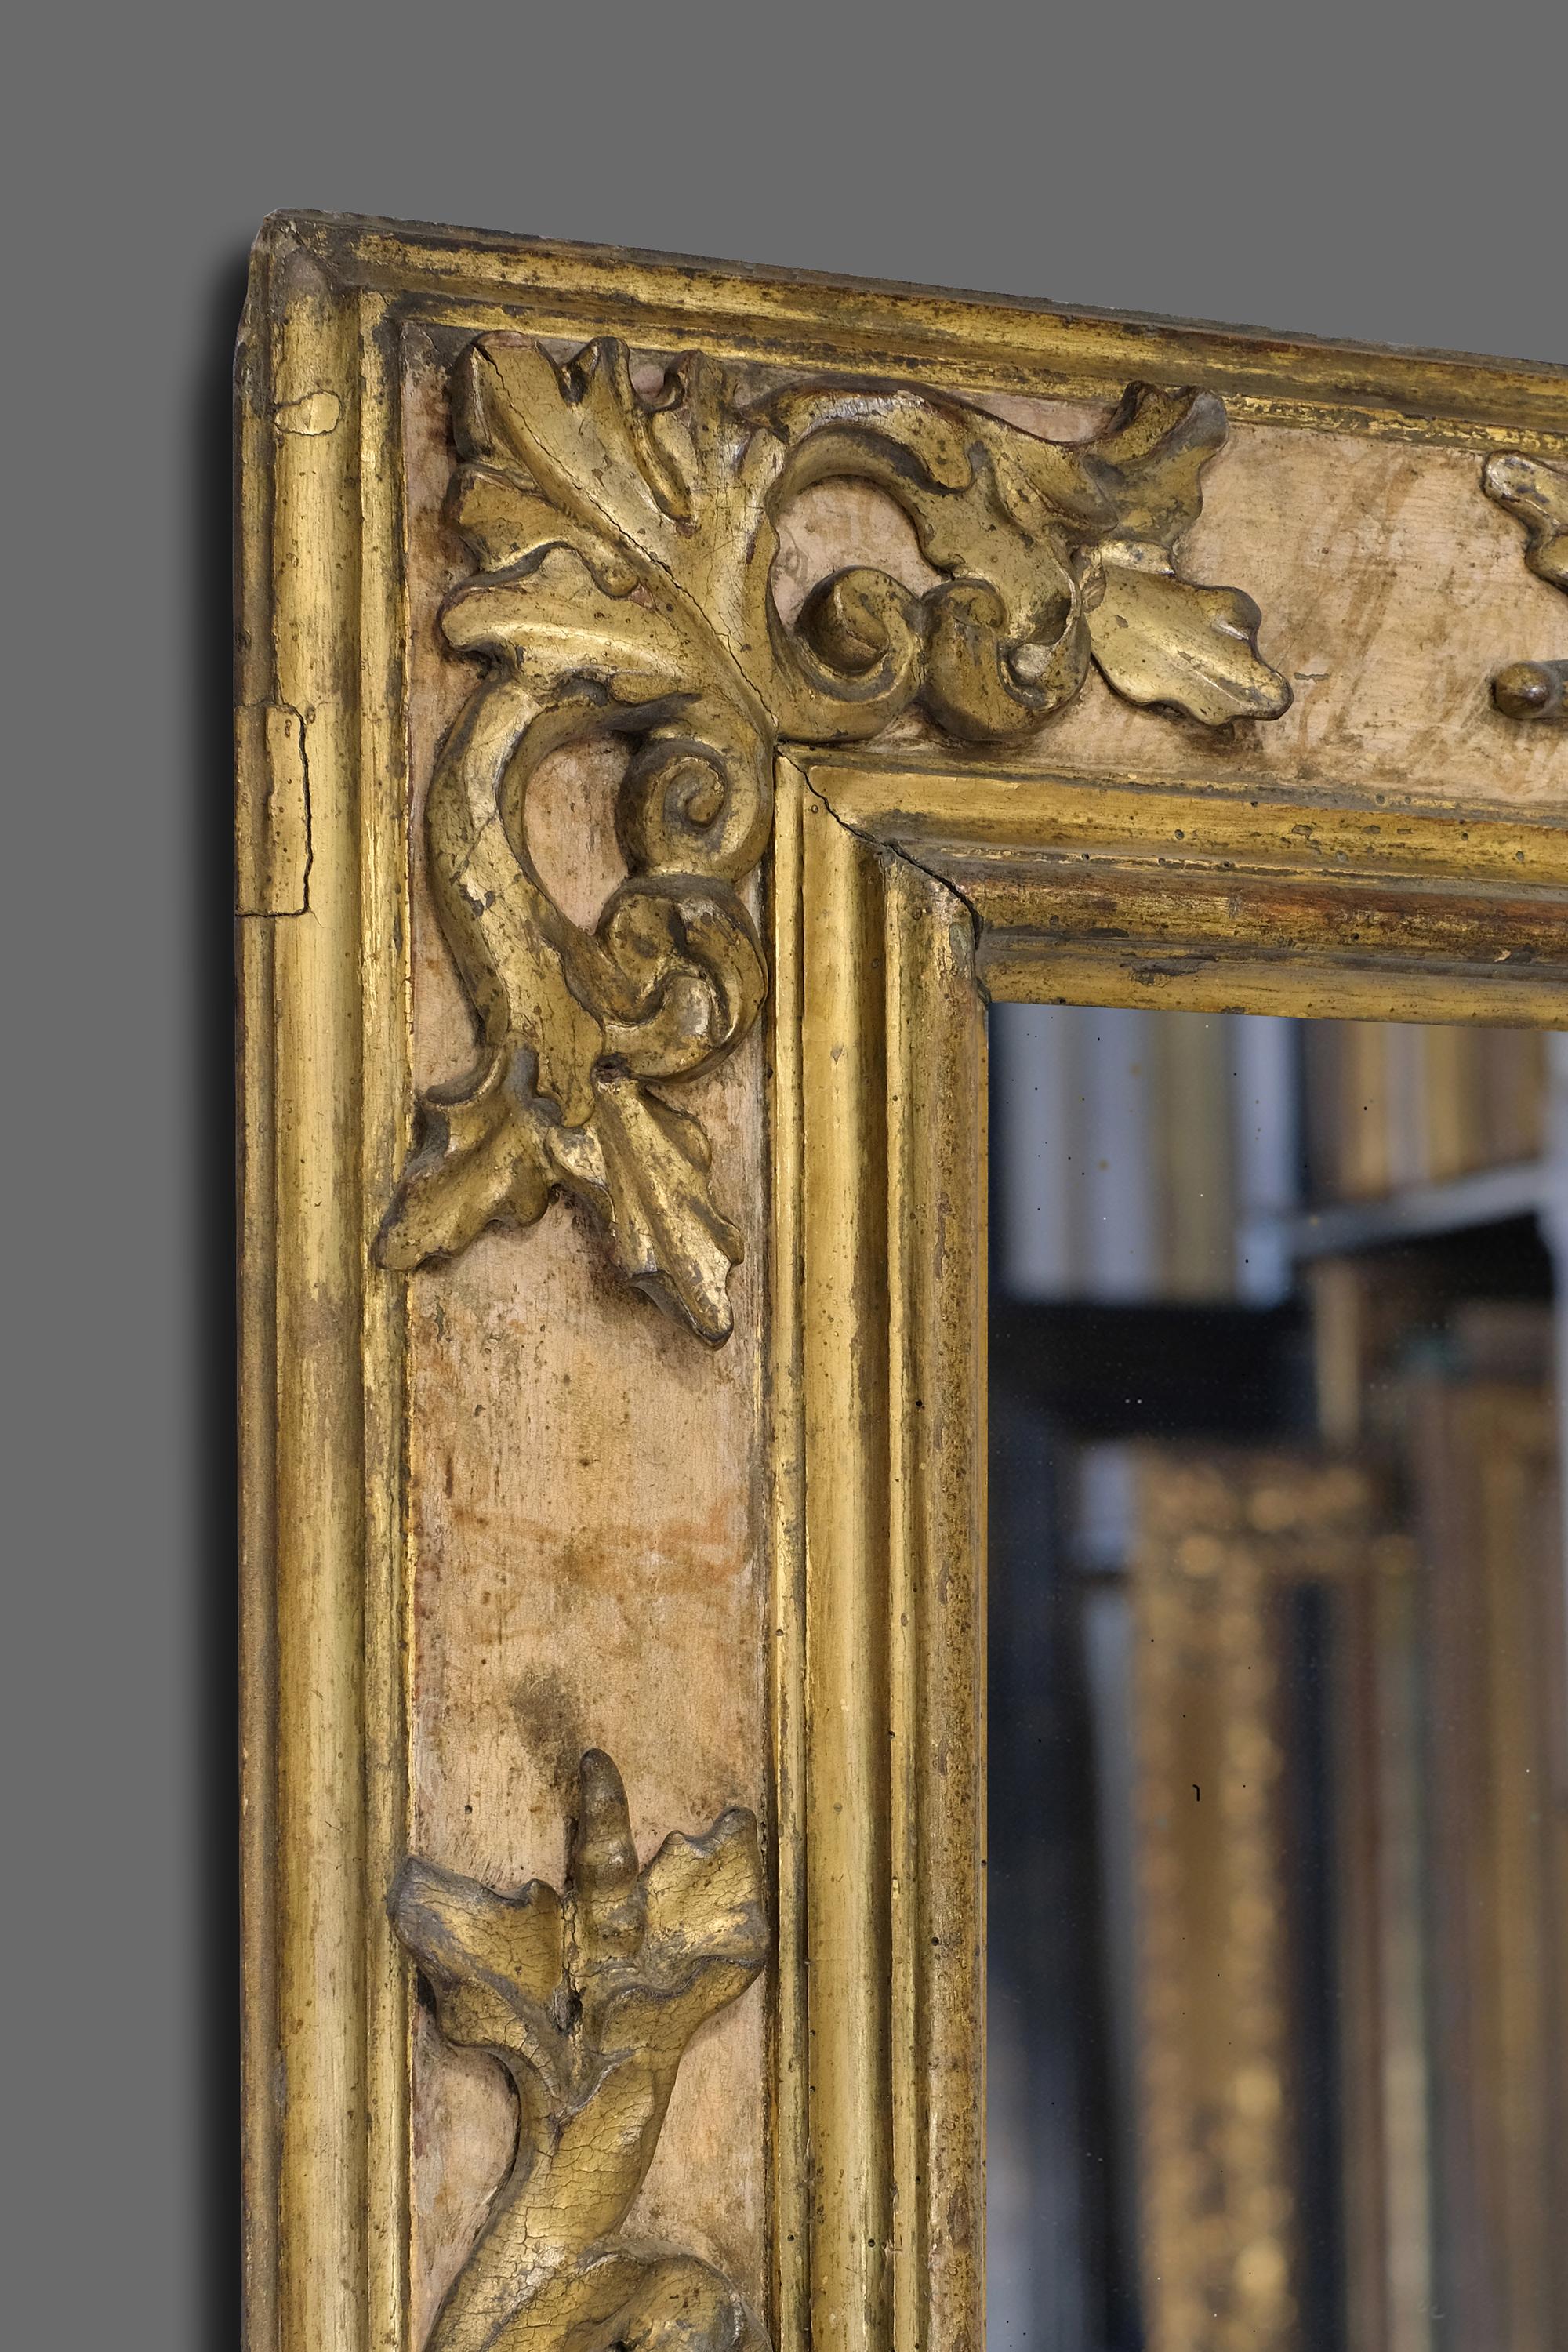 This is a beautifully hand carved, 17th century Italian (Tuscan) Baroque cassetta frame. It has a bolection - architrave profile with carved applied corner-&-center openwork foliate C-scrolled cartouches. The frame retains it's original matte and